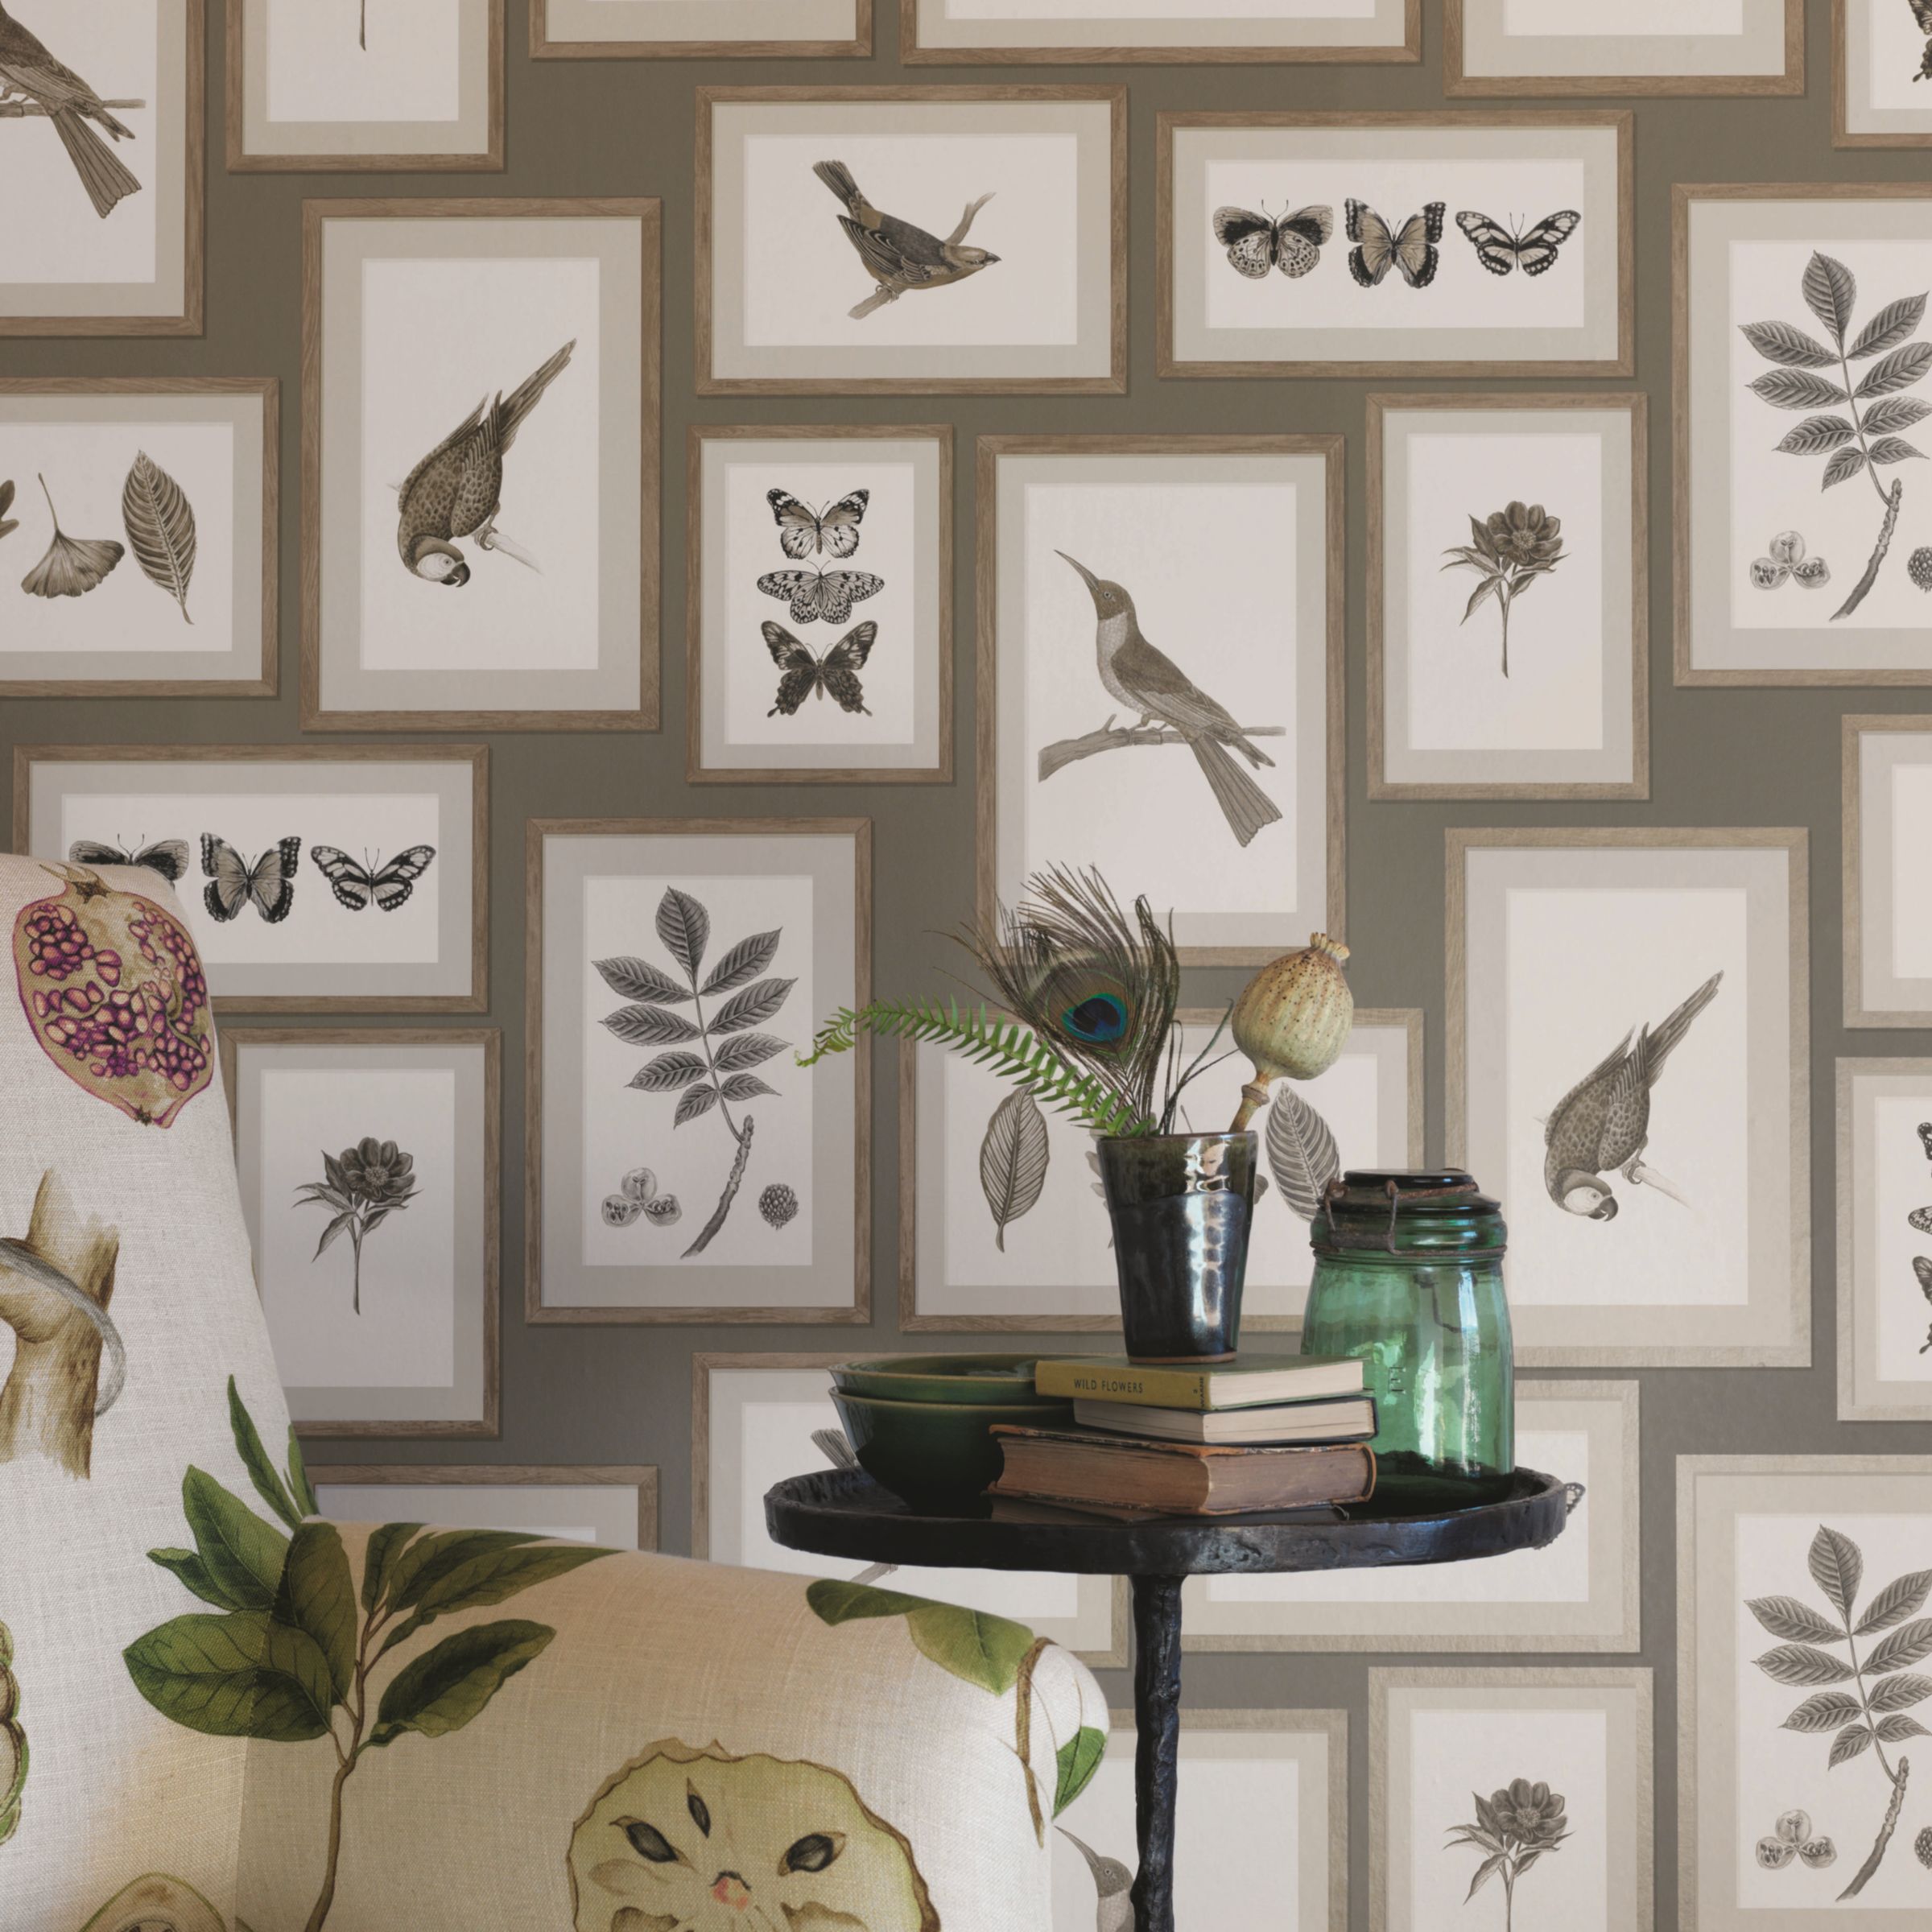 Sanderson Picture Gallery Wallpaper, Taupe/Sepia, DVOY213397